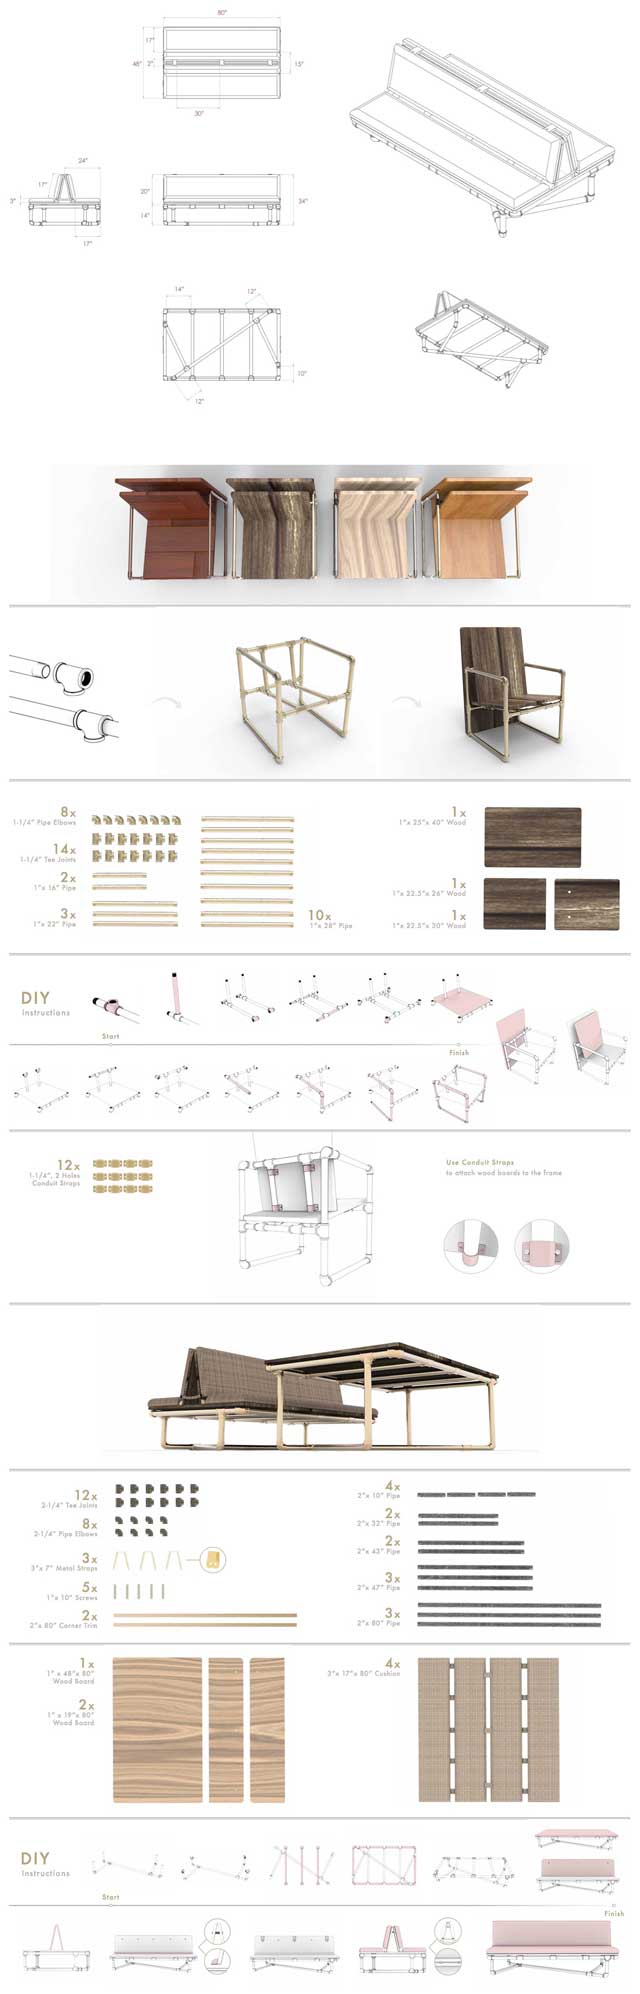 Eco-Renovating Our Standards of Living – Iris Hsu (Industrial Designer), put the final touches on the Pipe Couch and Table/Chair designs for the Duplicable City Center library by creating these final measurement documents for the couch and then detailed assembly instructions for both the couch and table/chair including a final render, parts list, and step-by-step instructions for putting them both together. Fantastic work by Iris Hsu!